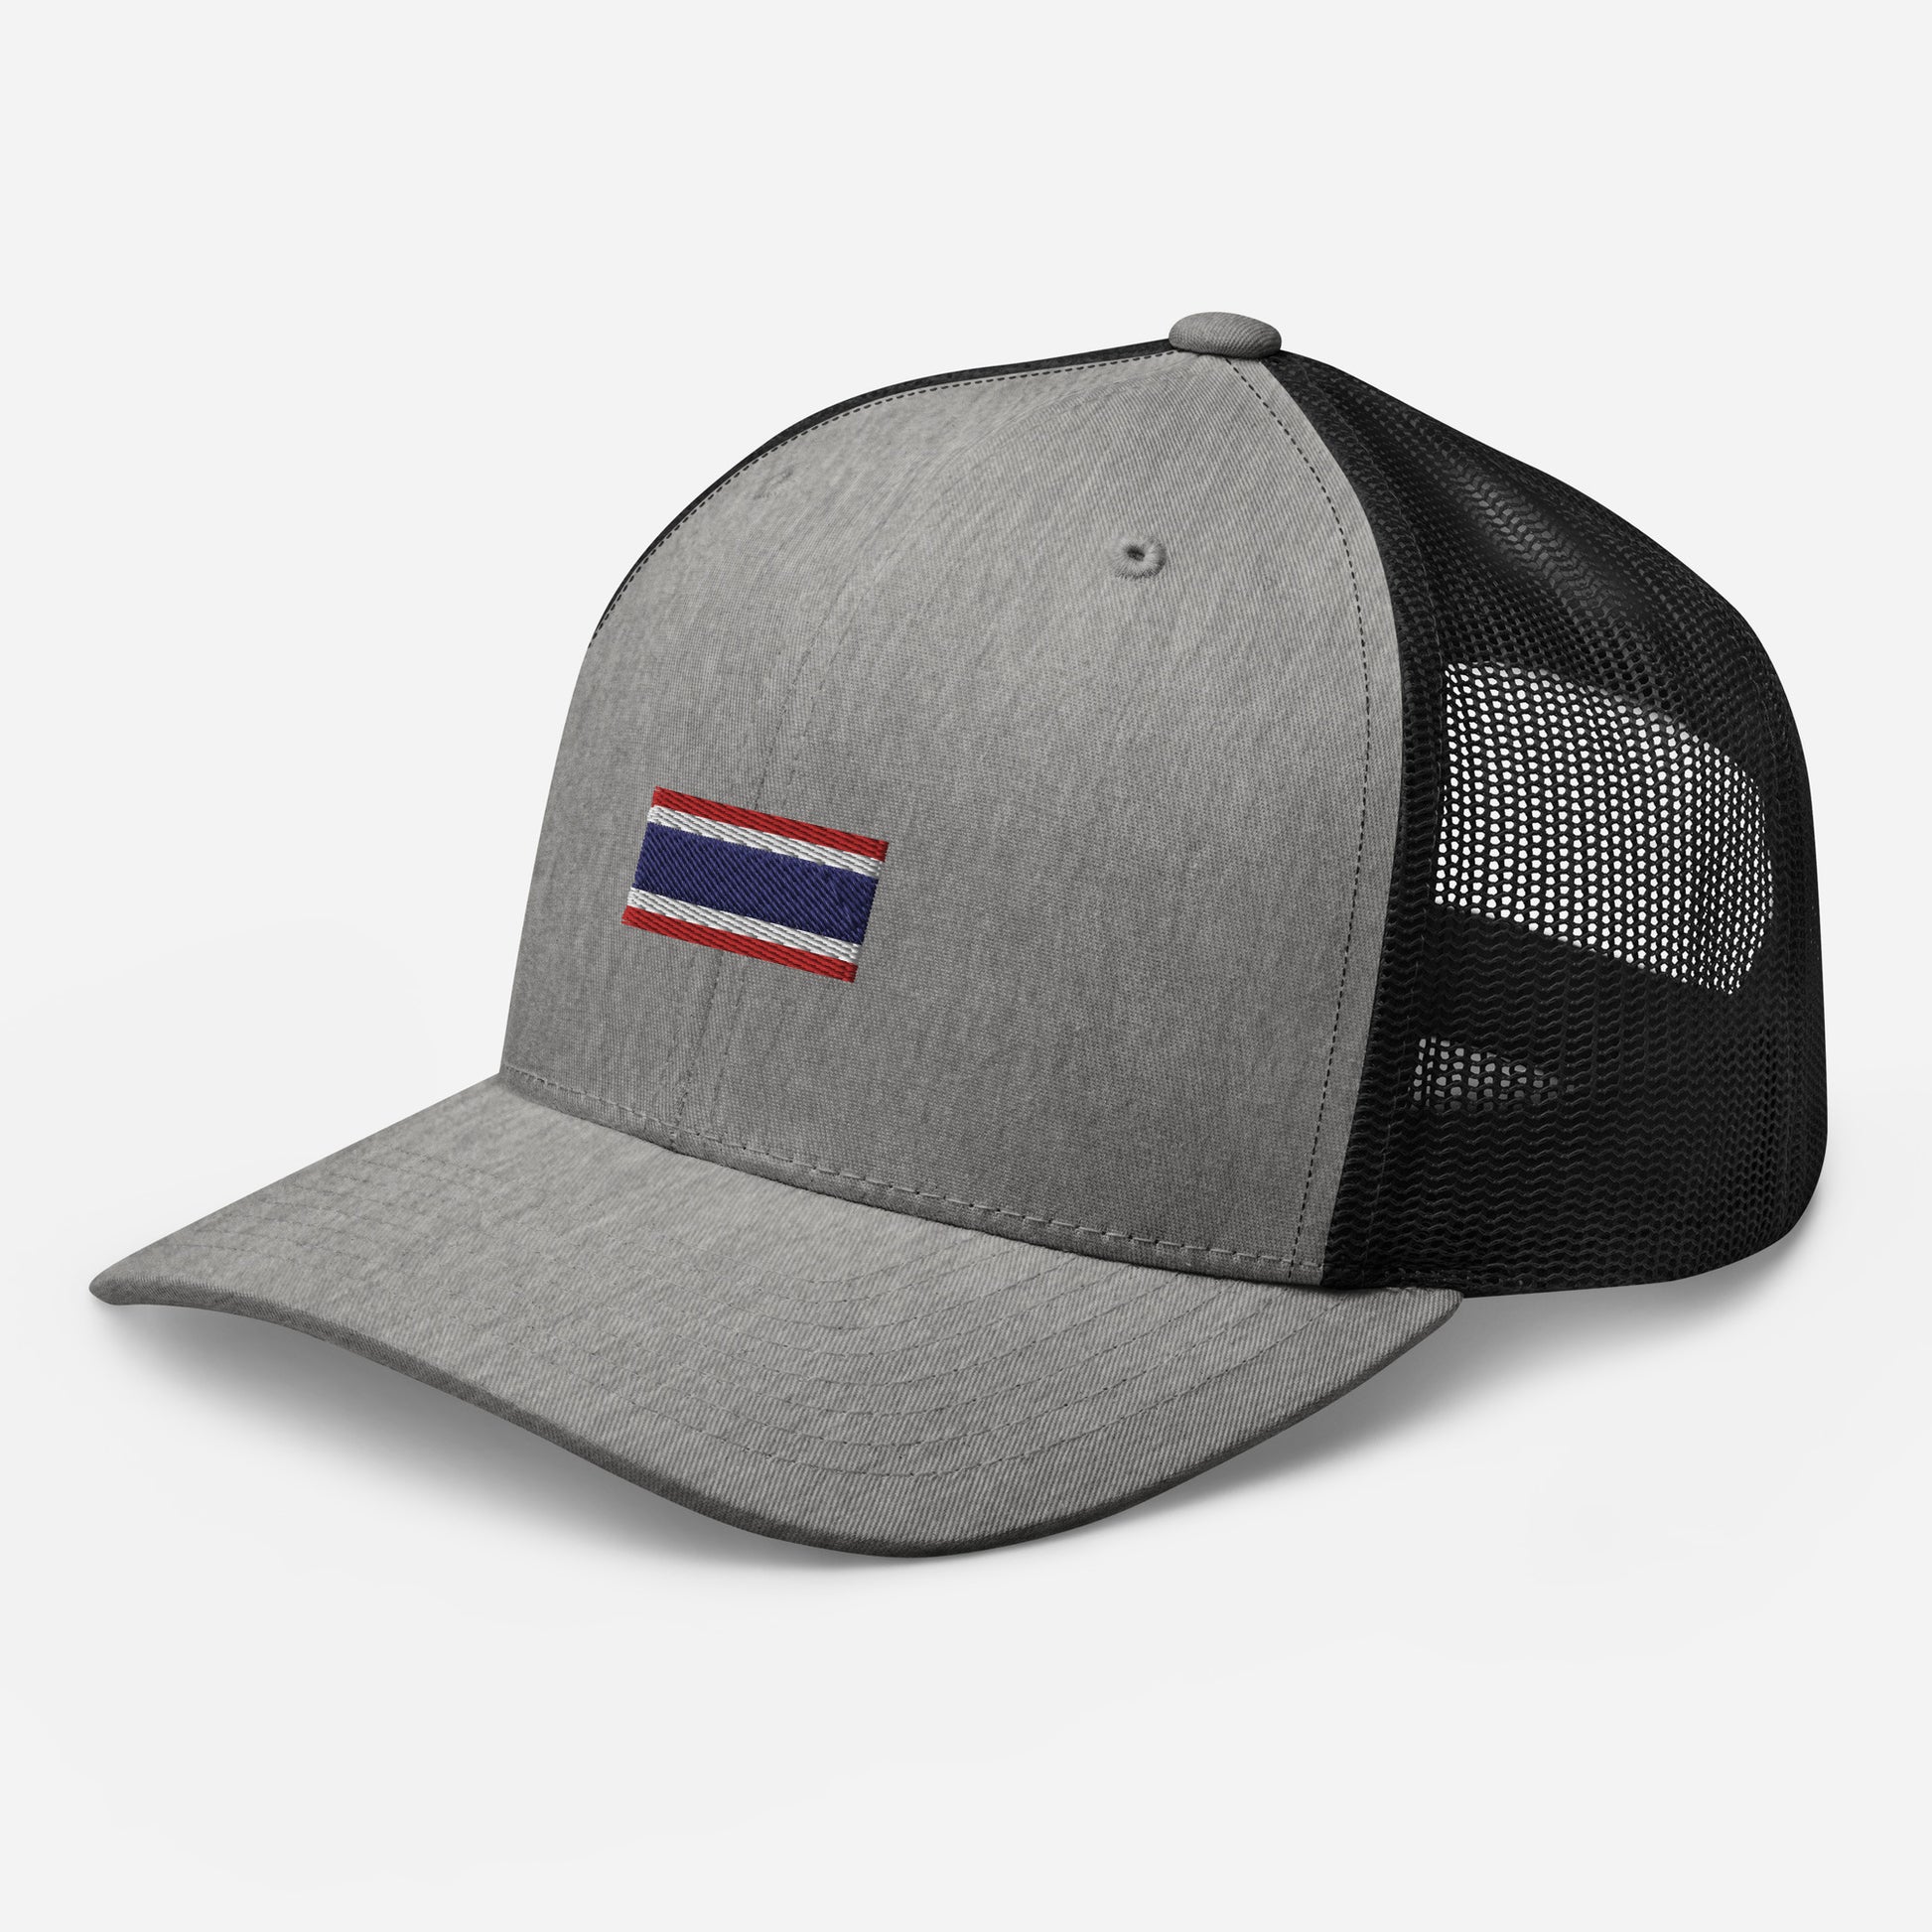 cap-from-the-front-with-thai-flag